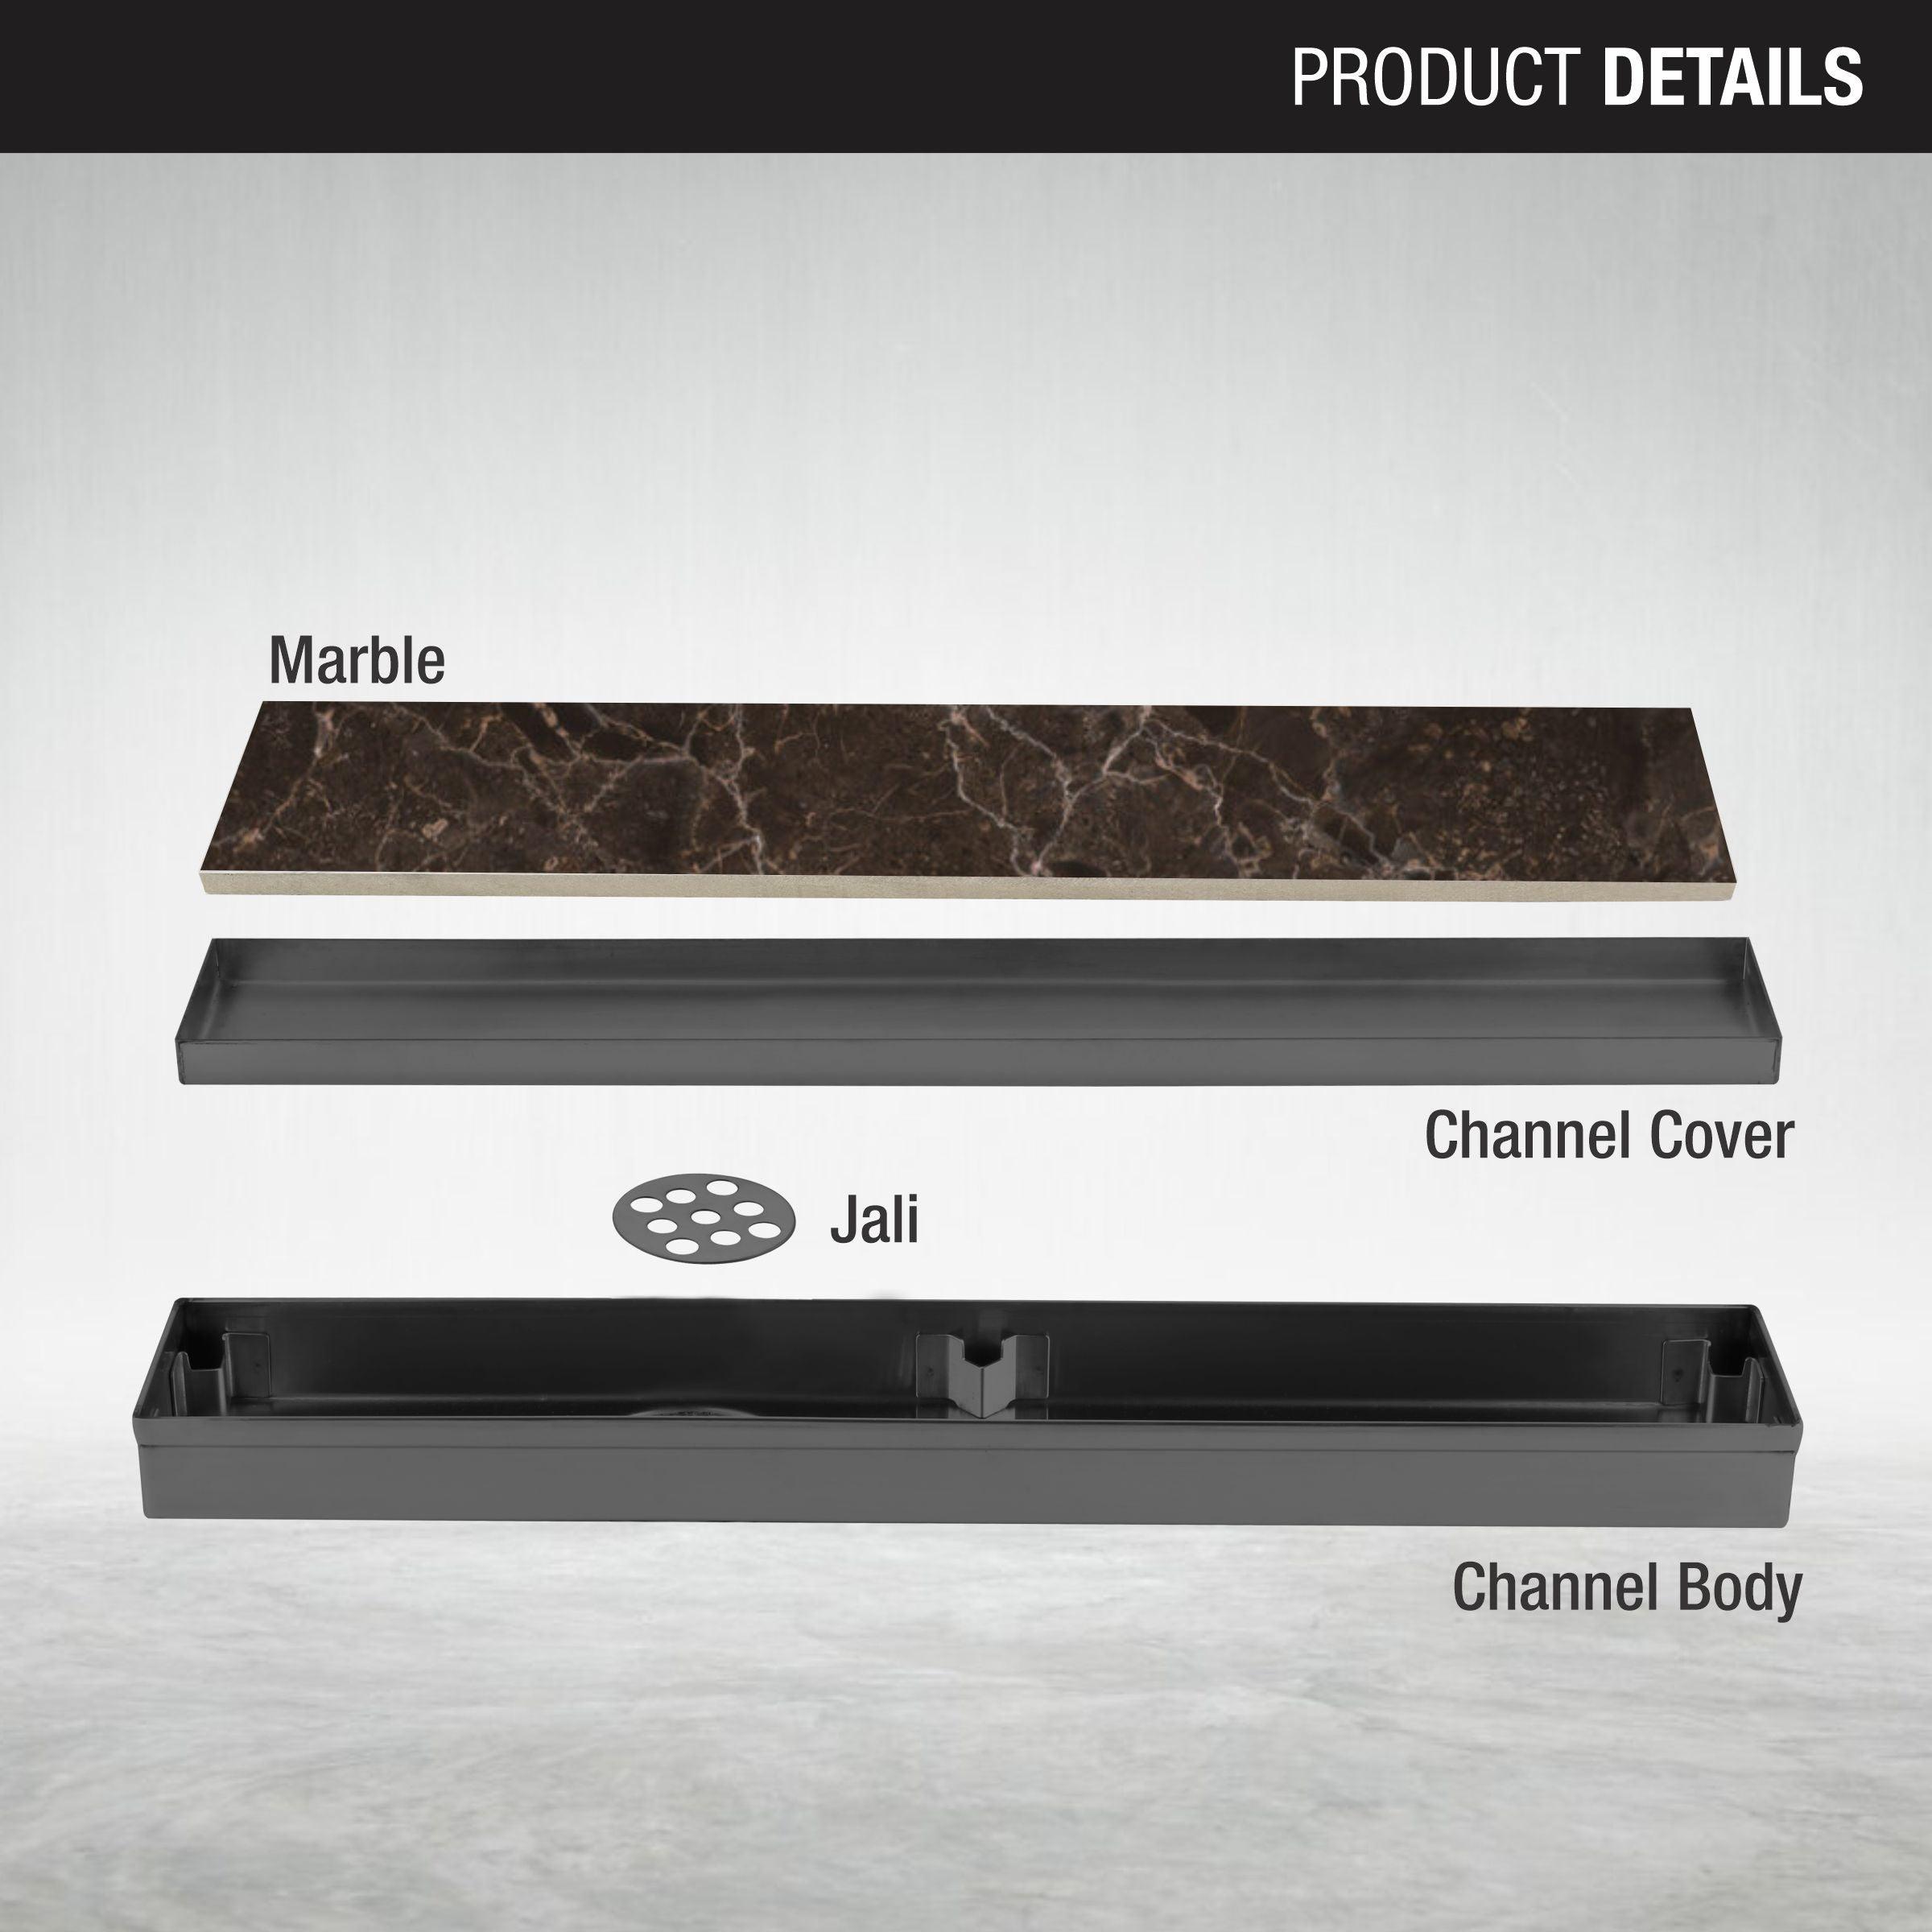 Marble Insert Shower Drain Channel - Black (36 x 2 Inches) product installation